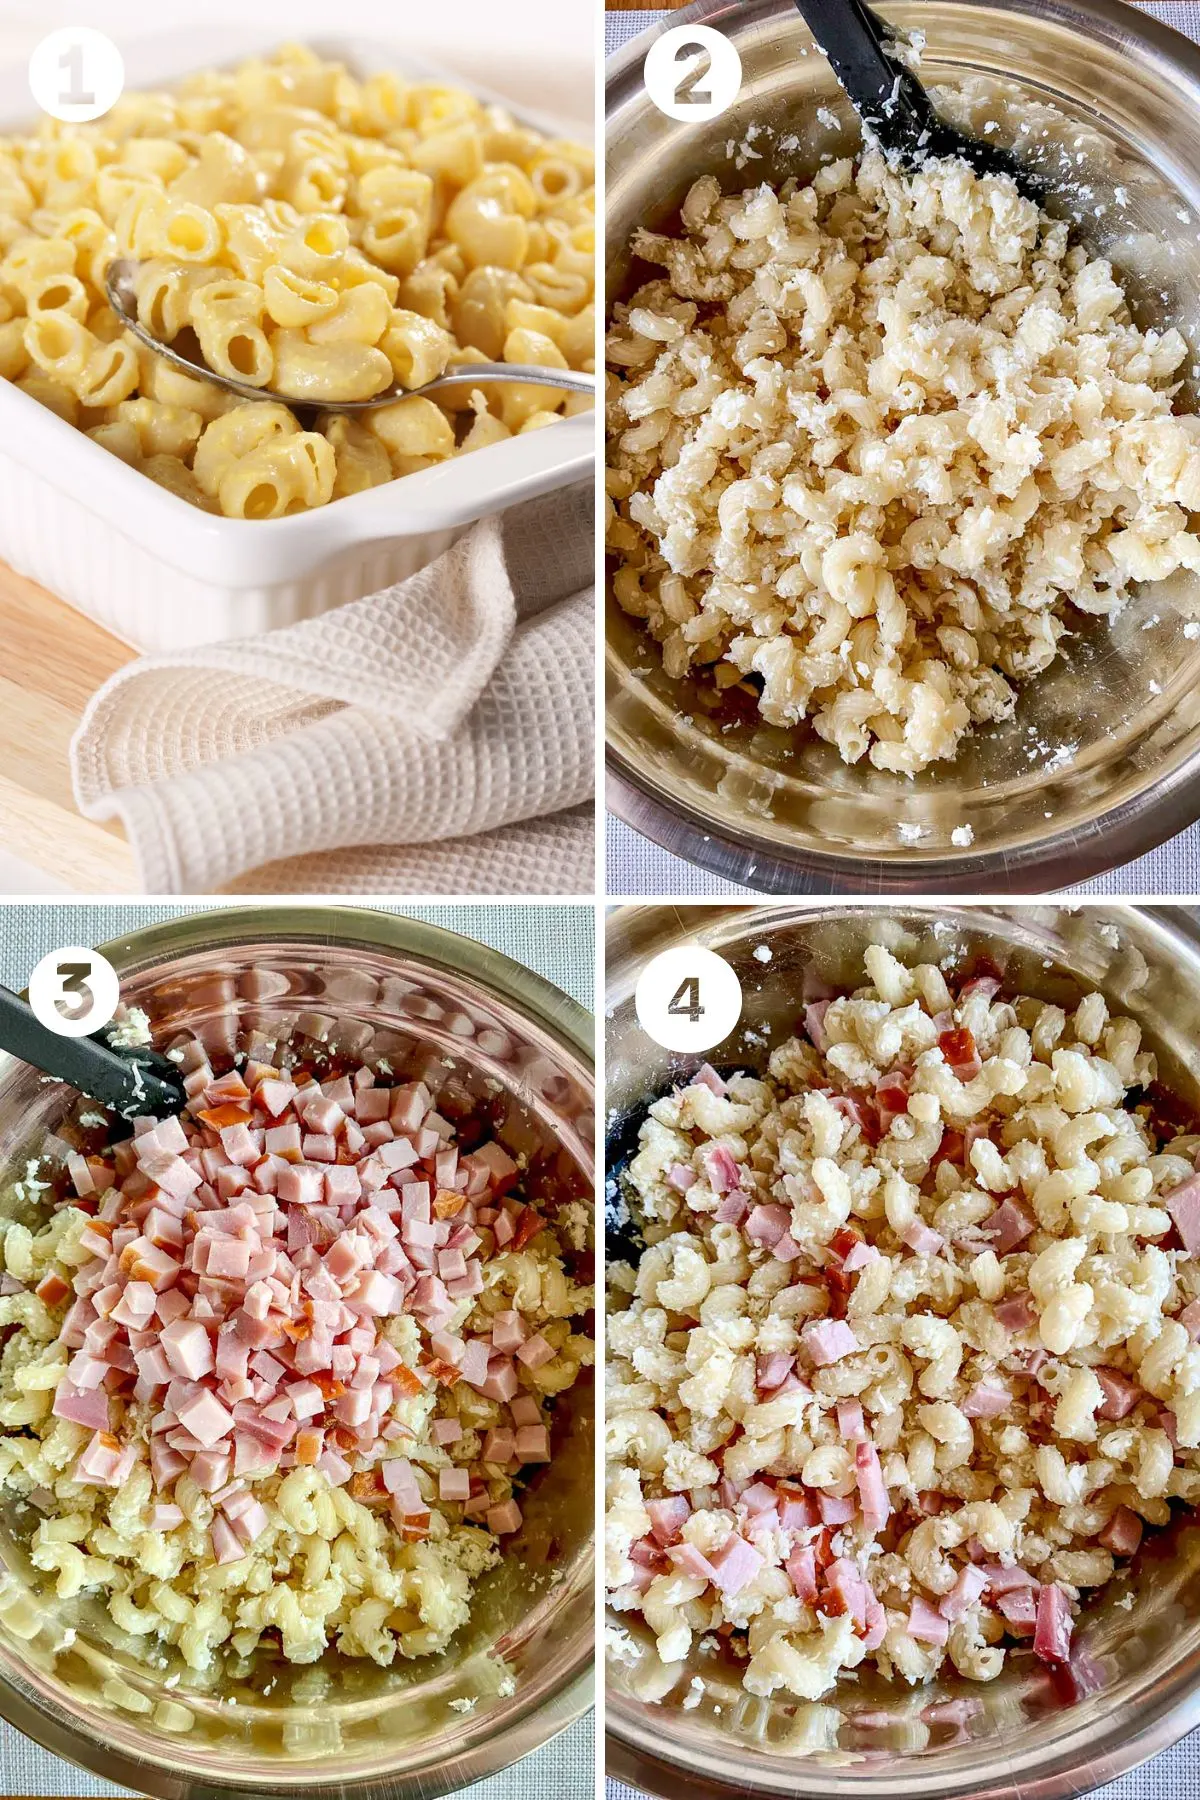 How To Make Mac And Cheese With Ham steps 1 to 4.